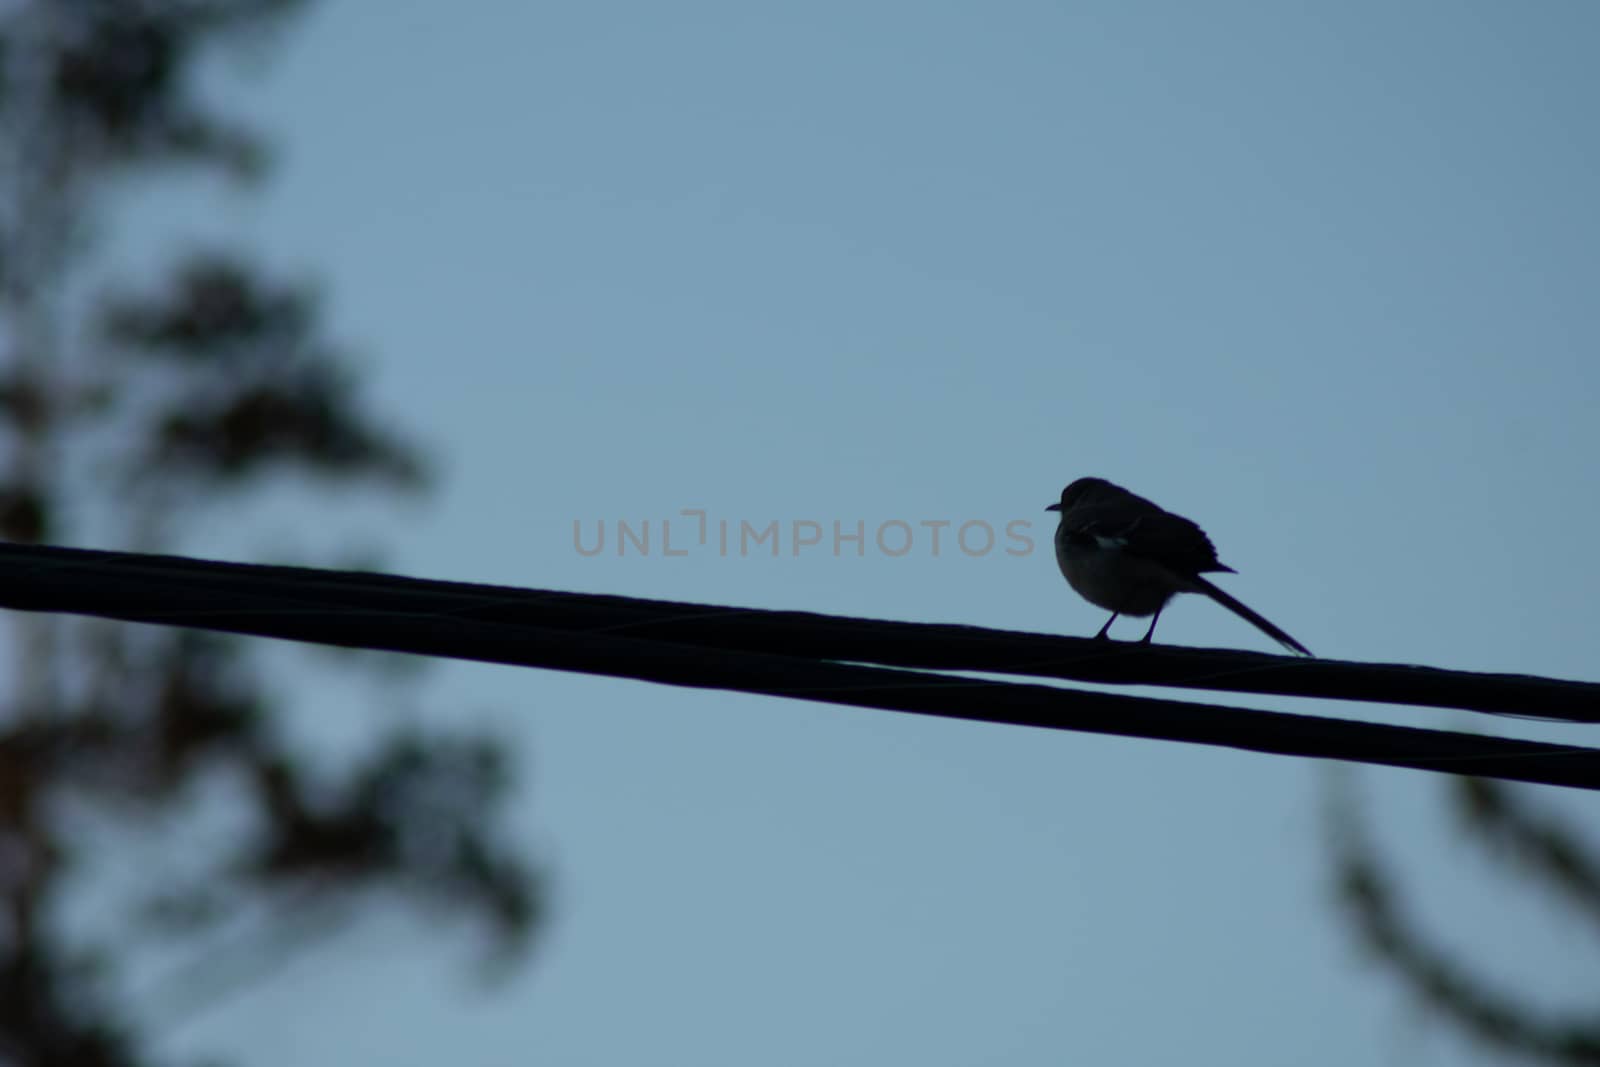 The Silhouette of a Small Bird Resting on a Wire With a Blue Sky Behind It